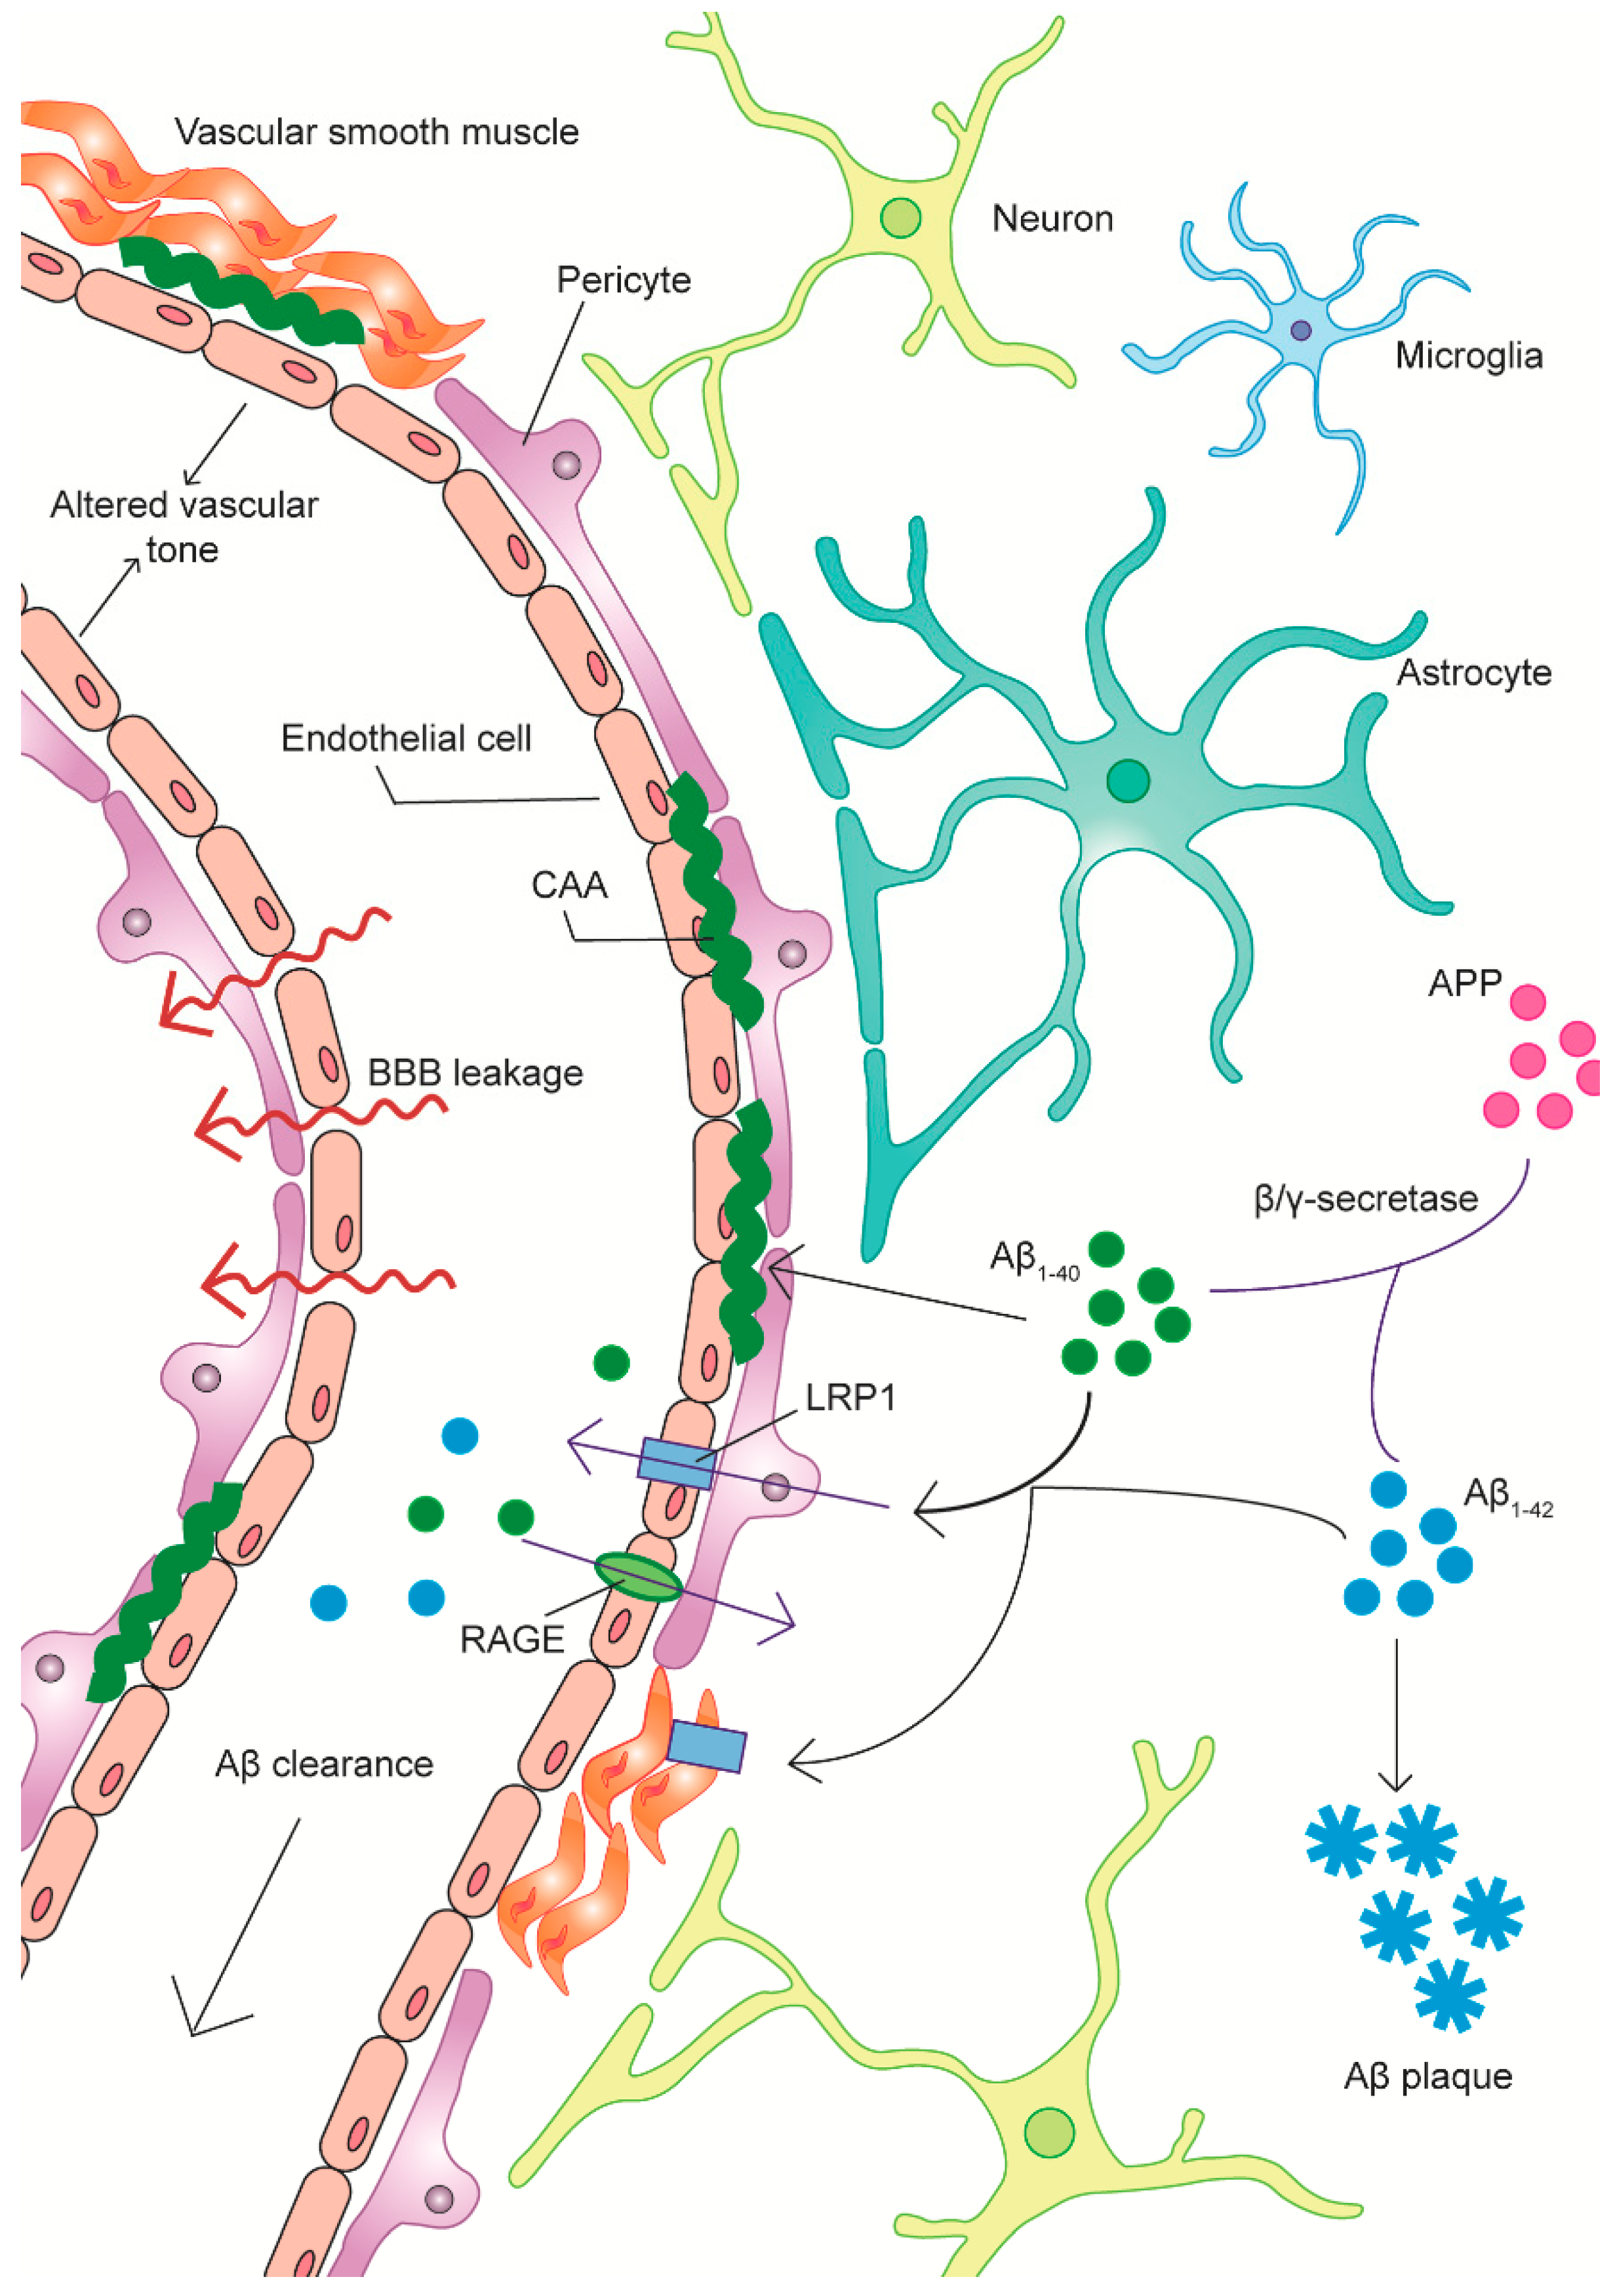 JCM | Free Full-Text | Vascular Dysfunction in Alzheimer's Disease: A  Prelude to the Pathological Process or a Consequence of It? | HTML